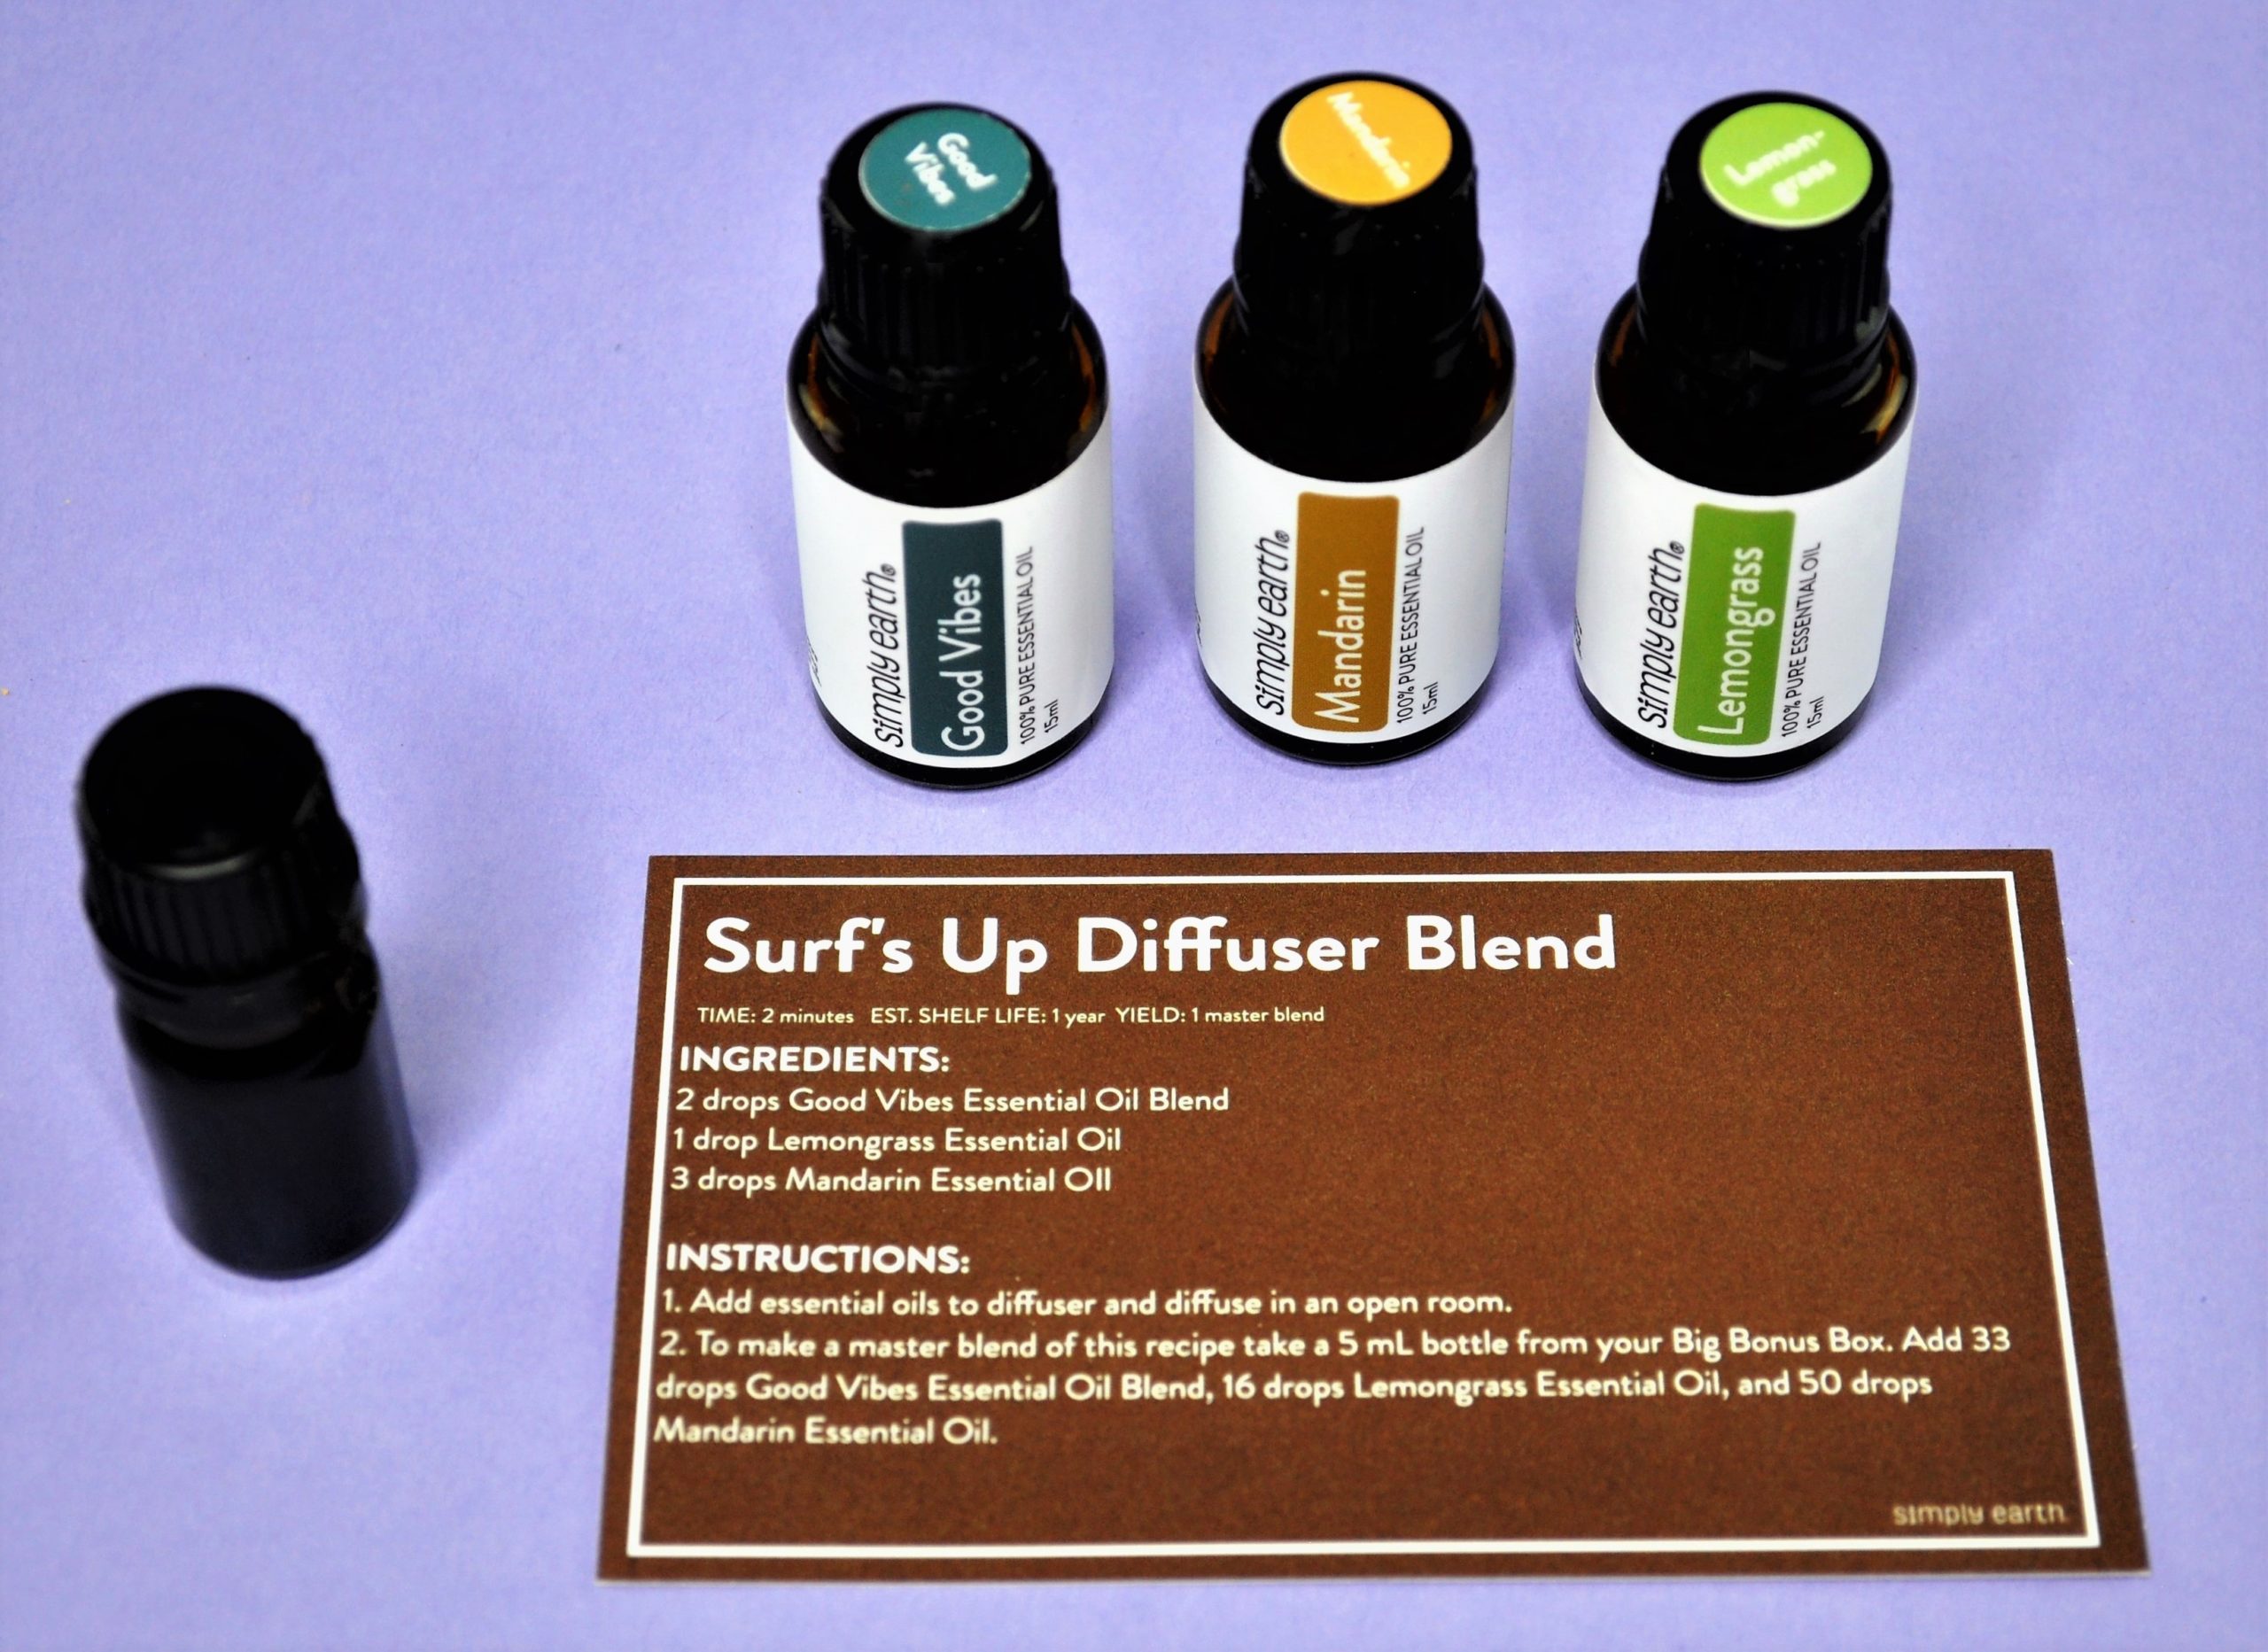 Simply Earth Surf's Up Diffuser Blend